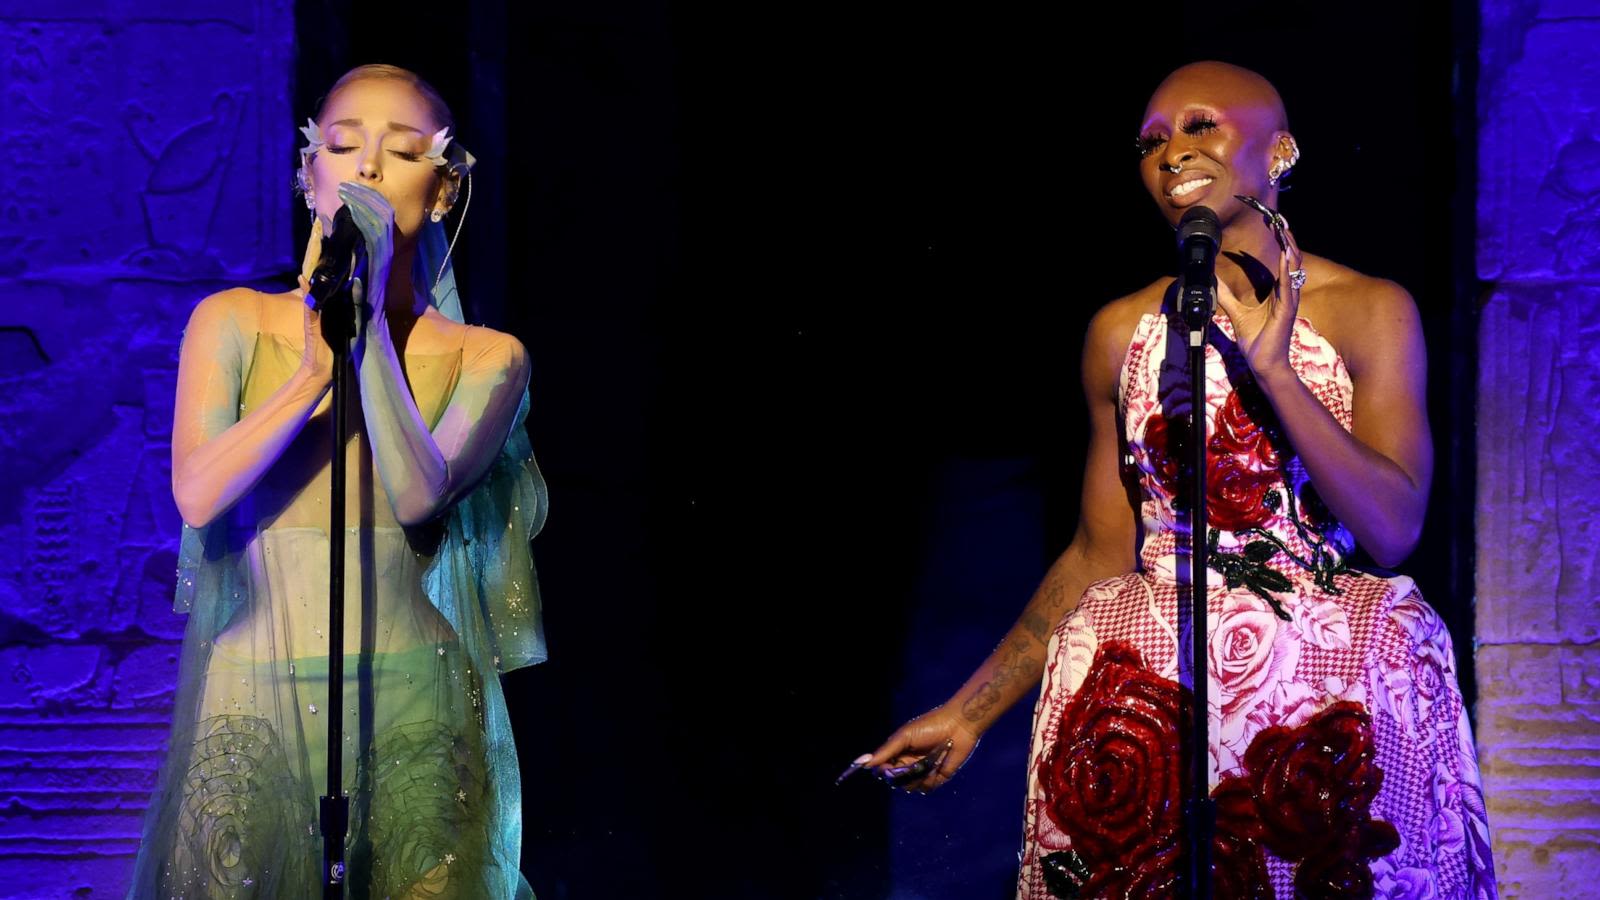 Cynthia Erivo shares how 'special' Met Gala performance with Ariana Grande came to life